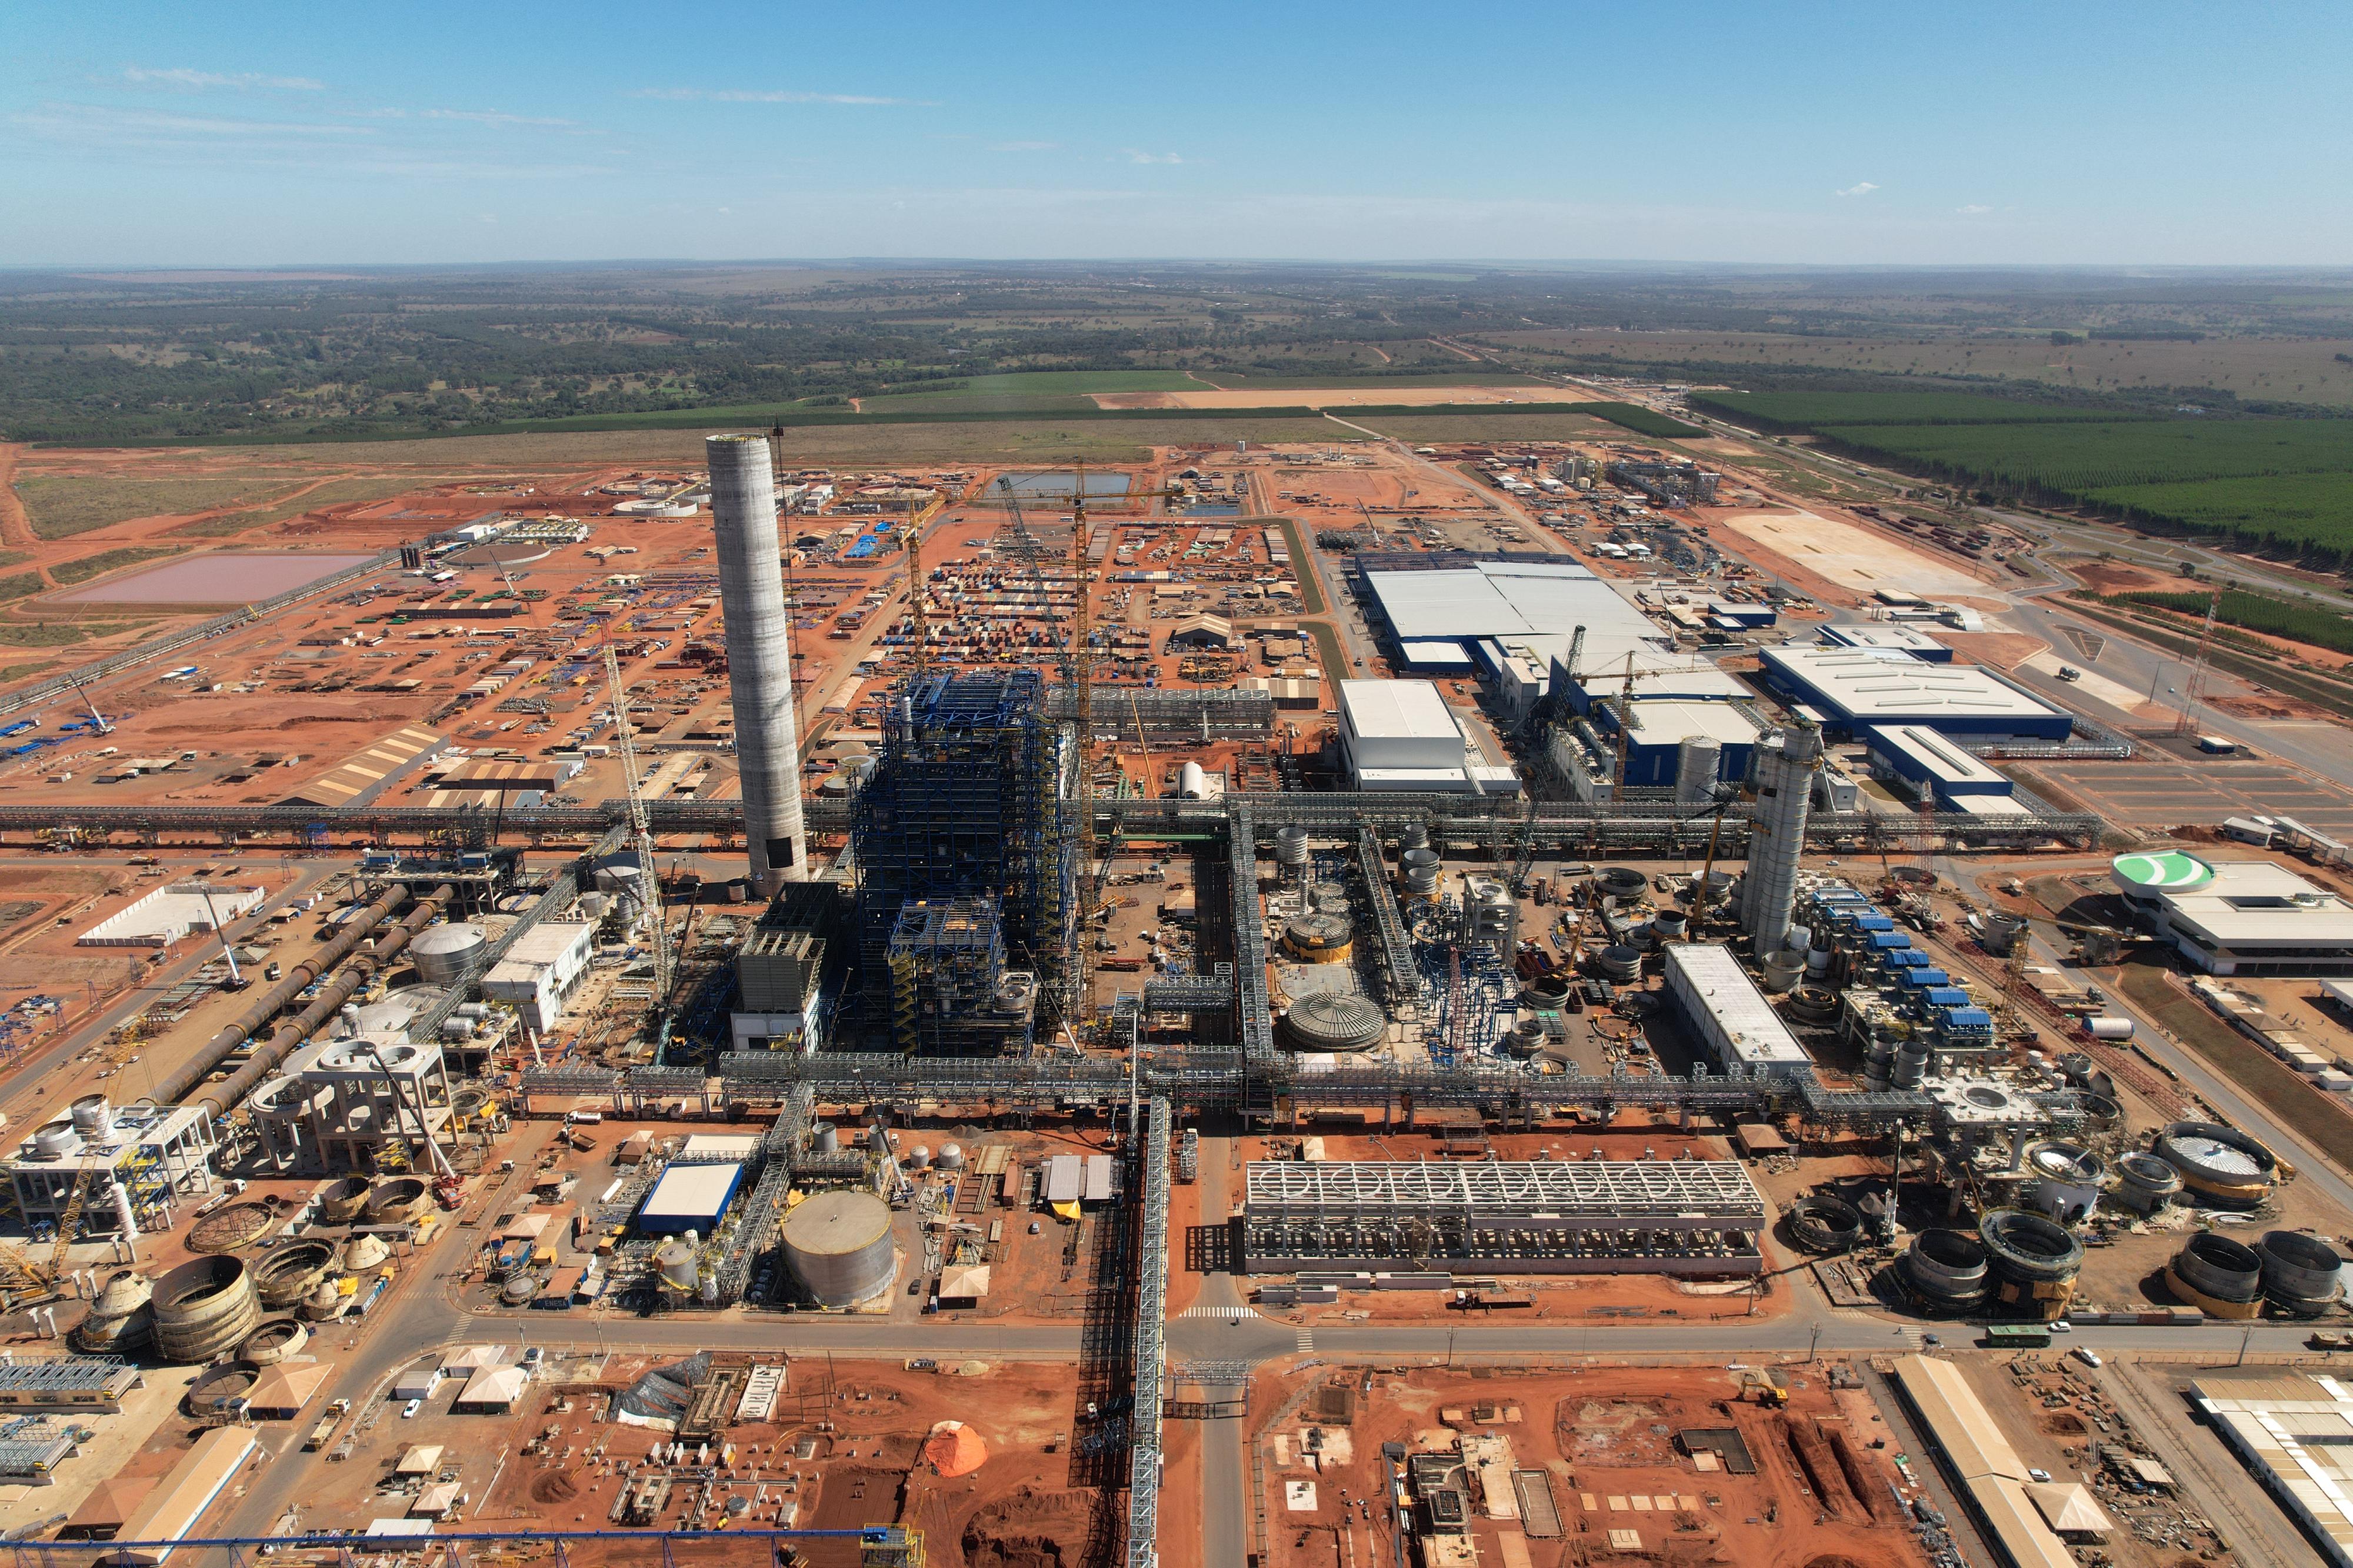 ANDRITZ Secures Major Conversion Project for Suzano's Limeira Pulp Mill, EuropaWire.eu